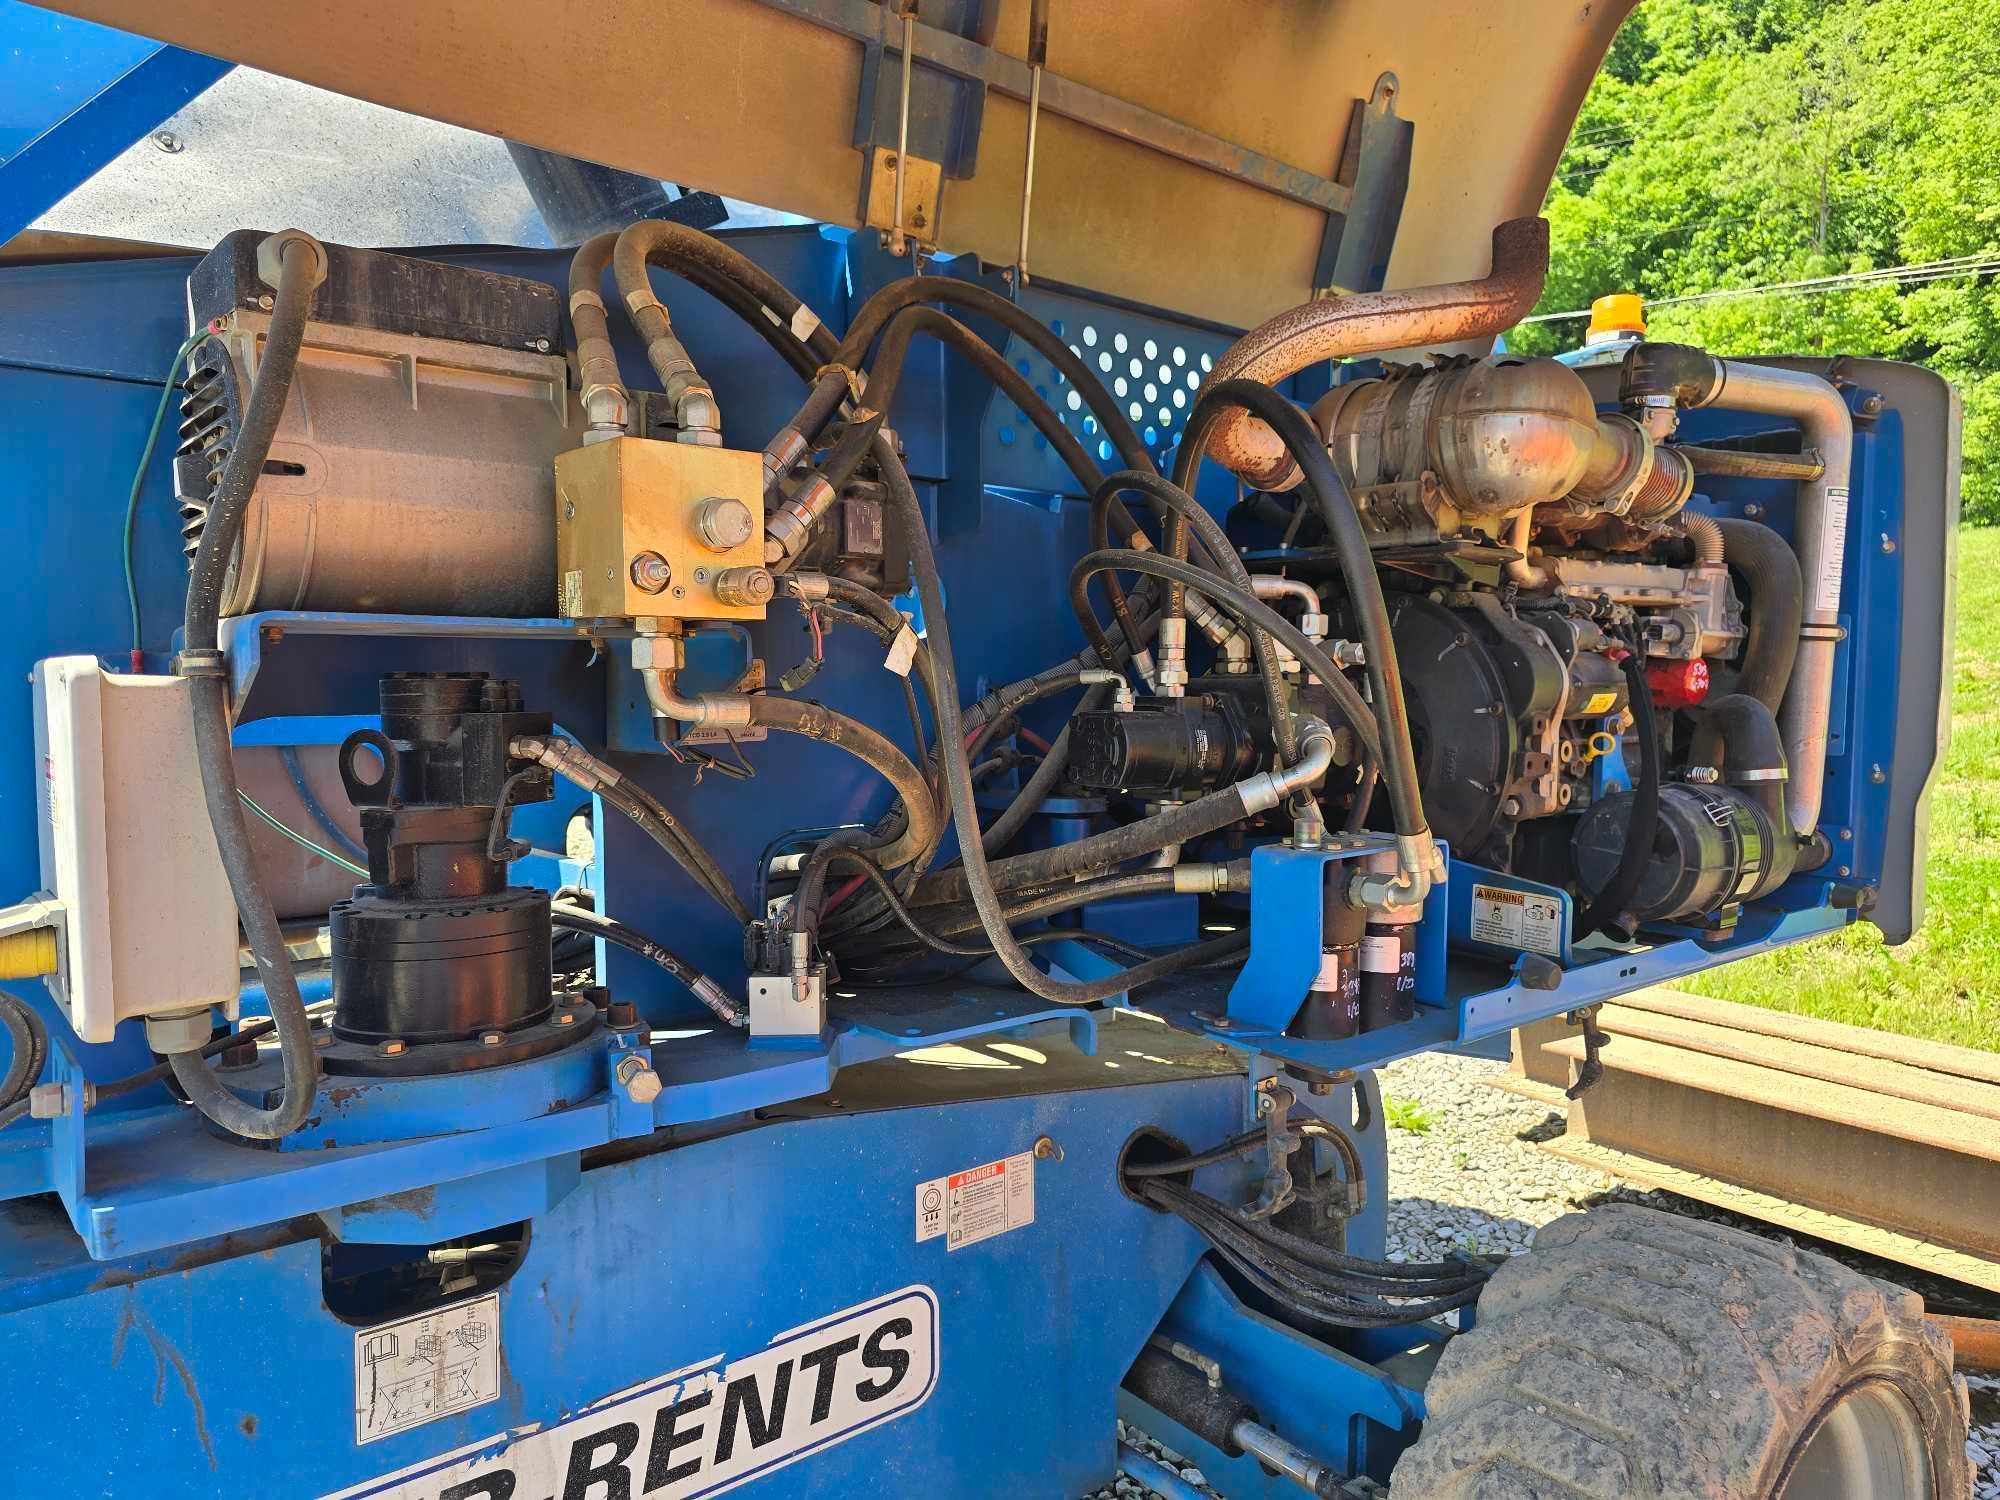 2014 GENIE S-65 BOOM LIFT SN:S6014A-28840, 4X4, powered by diesel engine, equipped with 65ft.